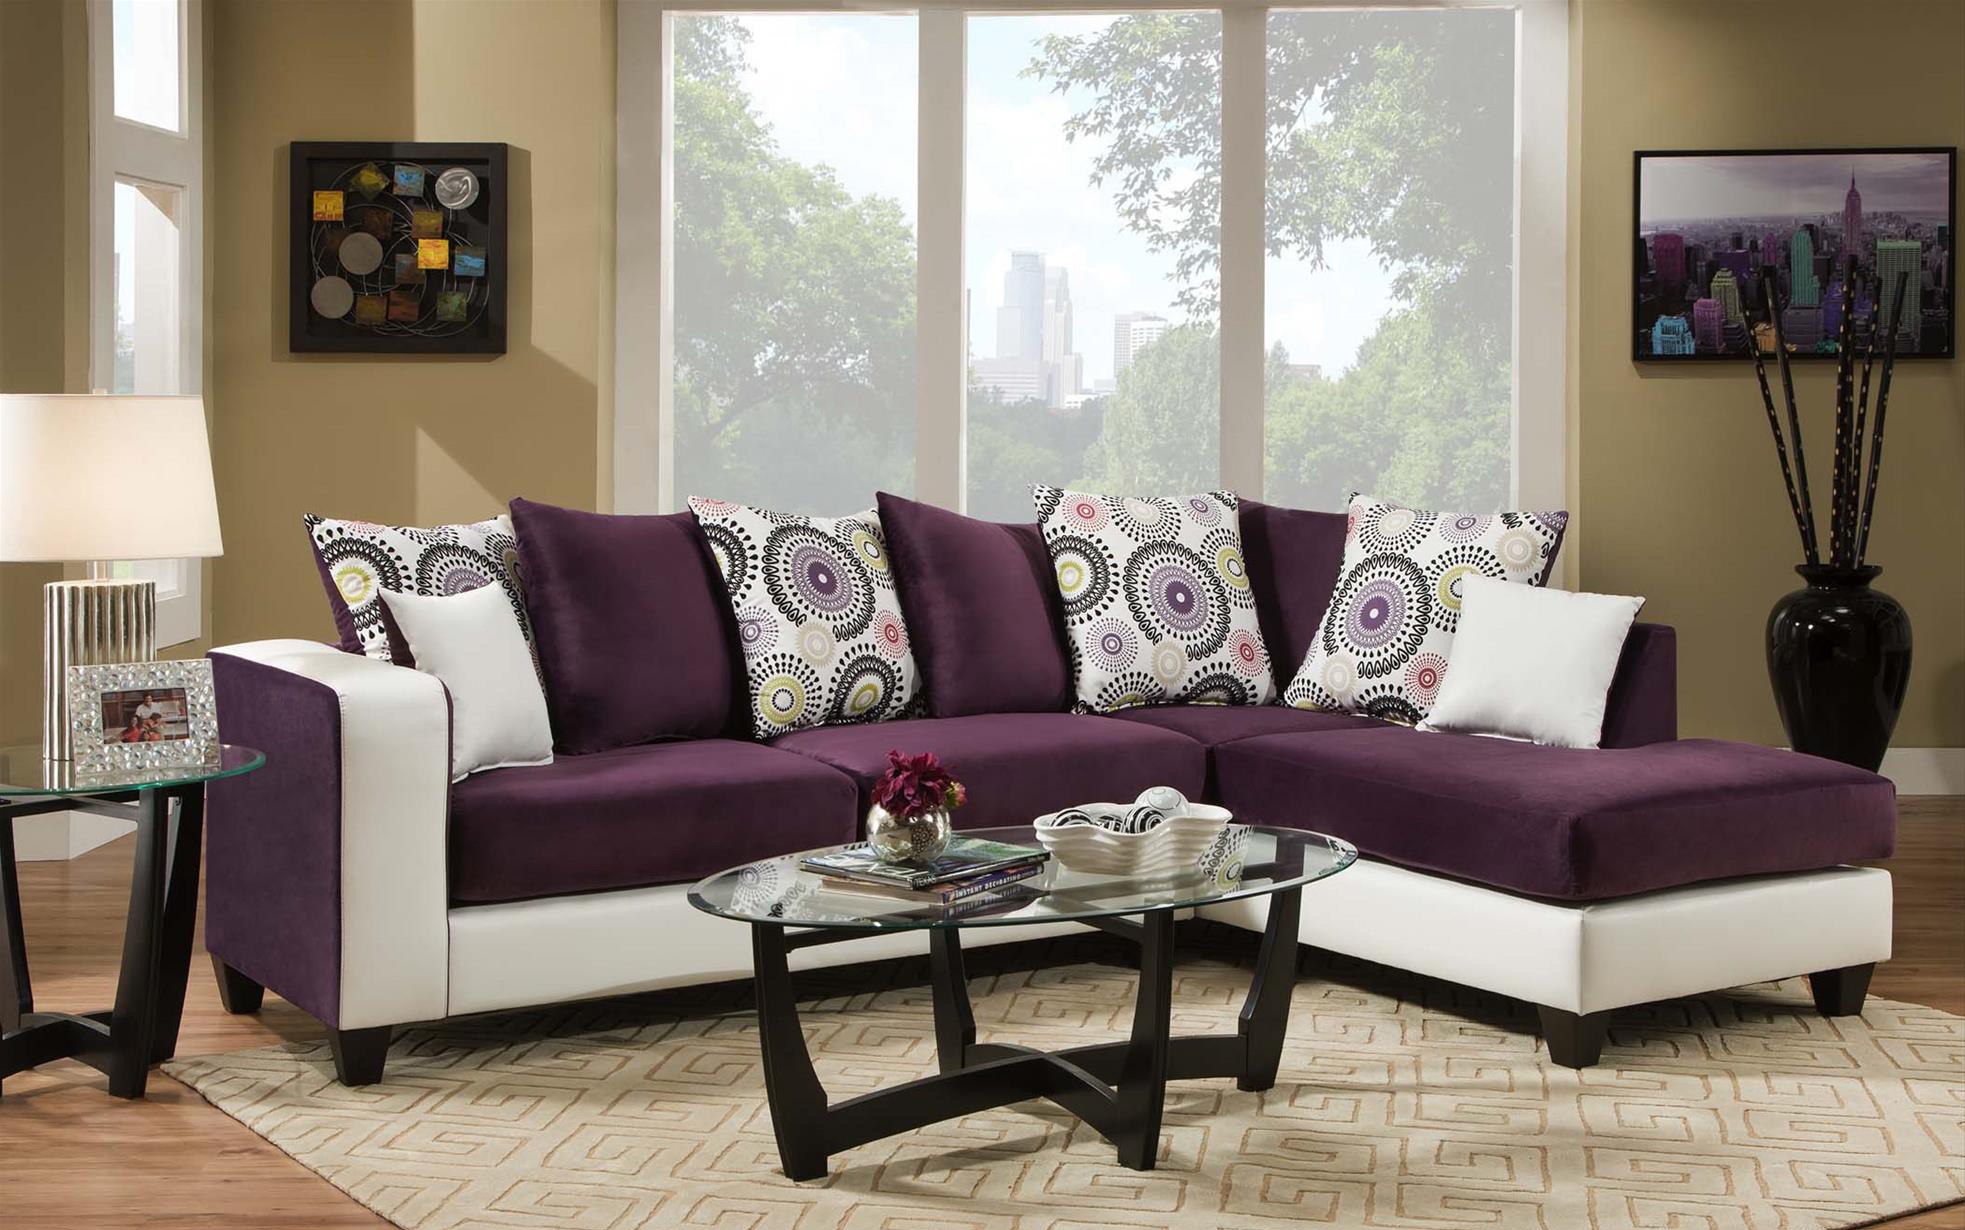 107" X 76" X 37" Implosion Purple Stark White 100% PU, 100% Polyester Blend Sectional